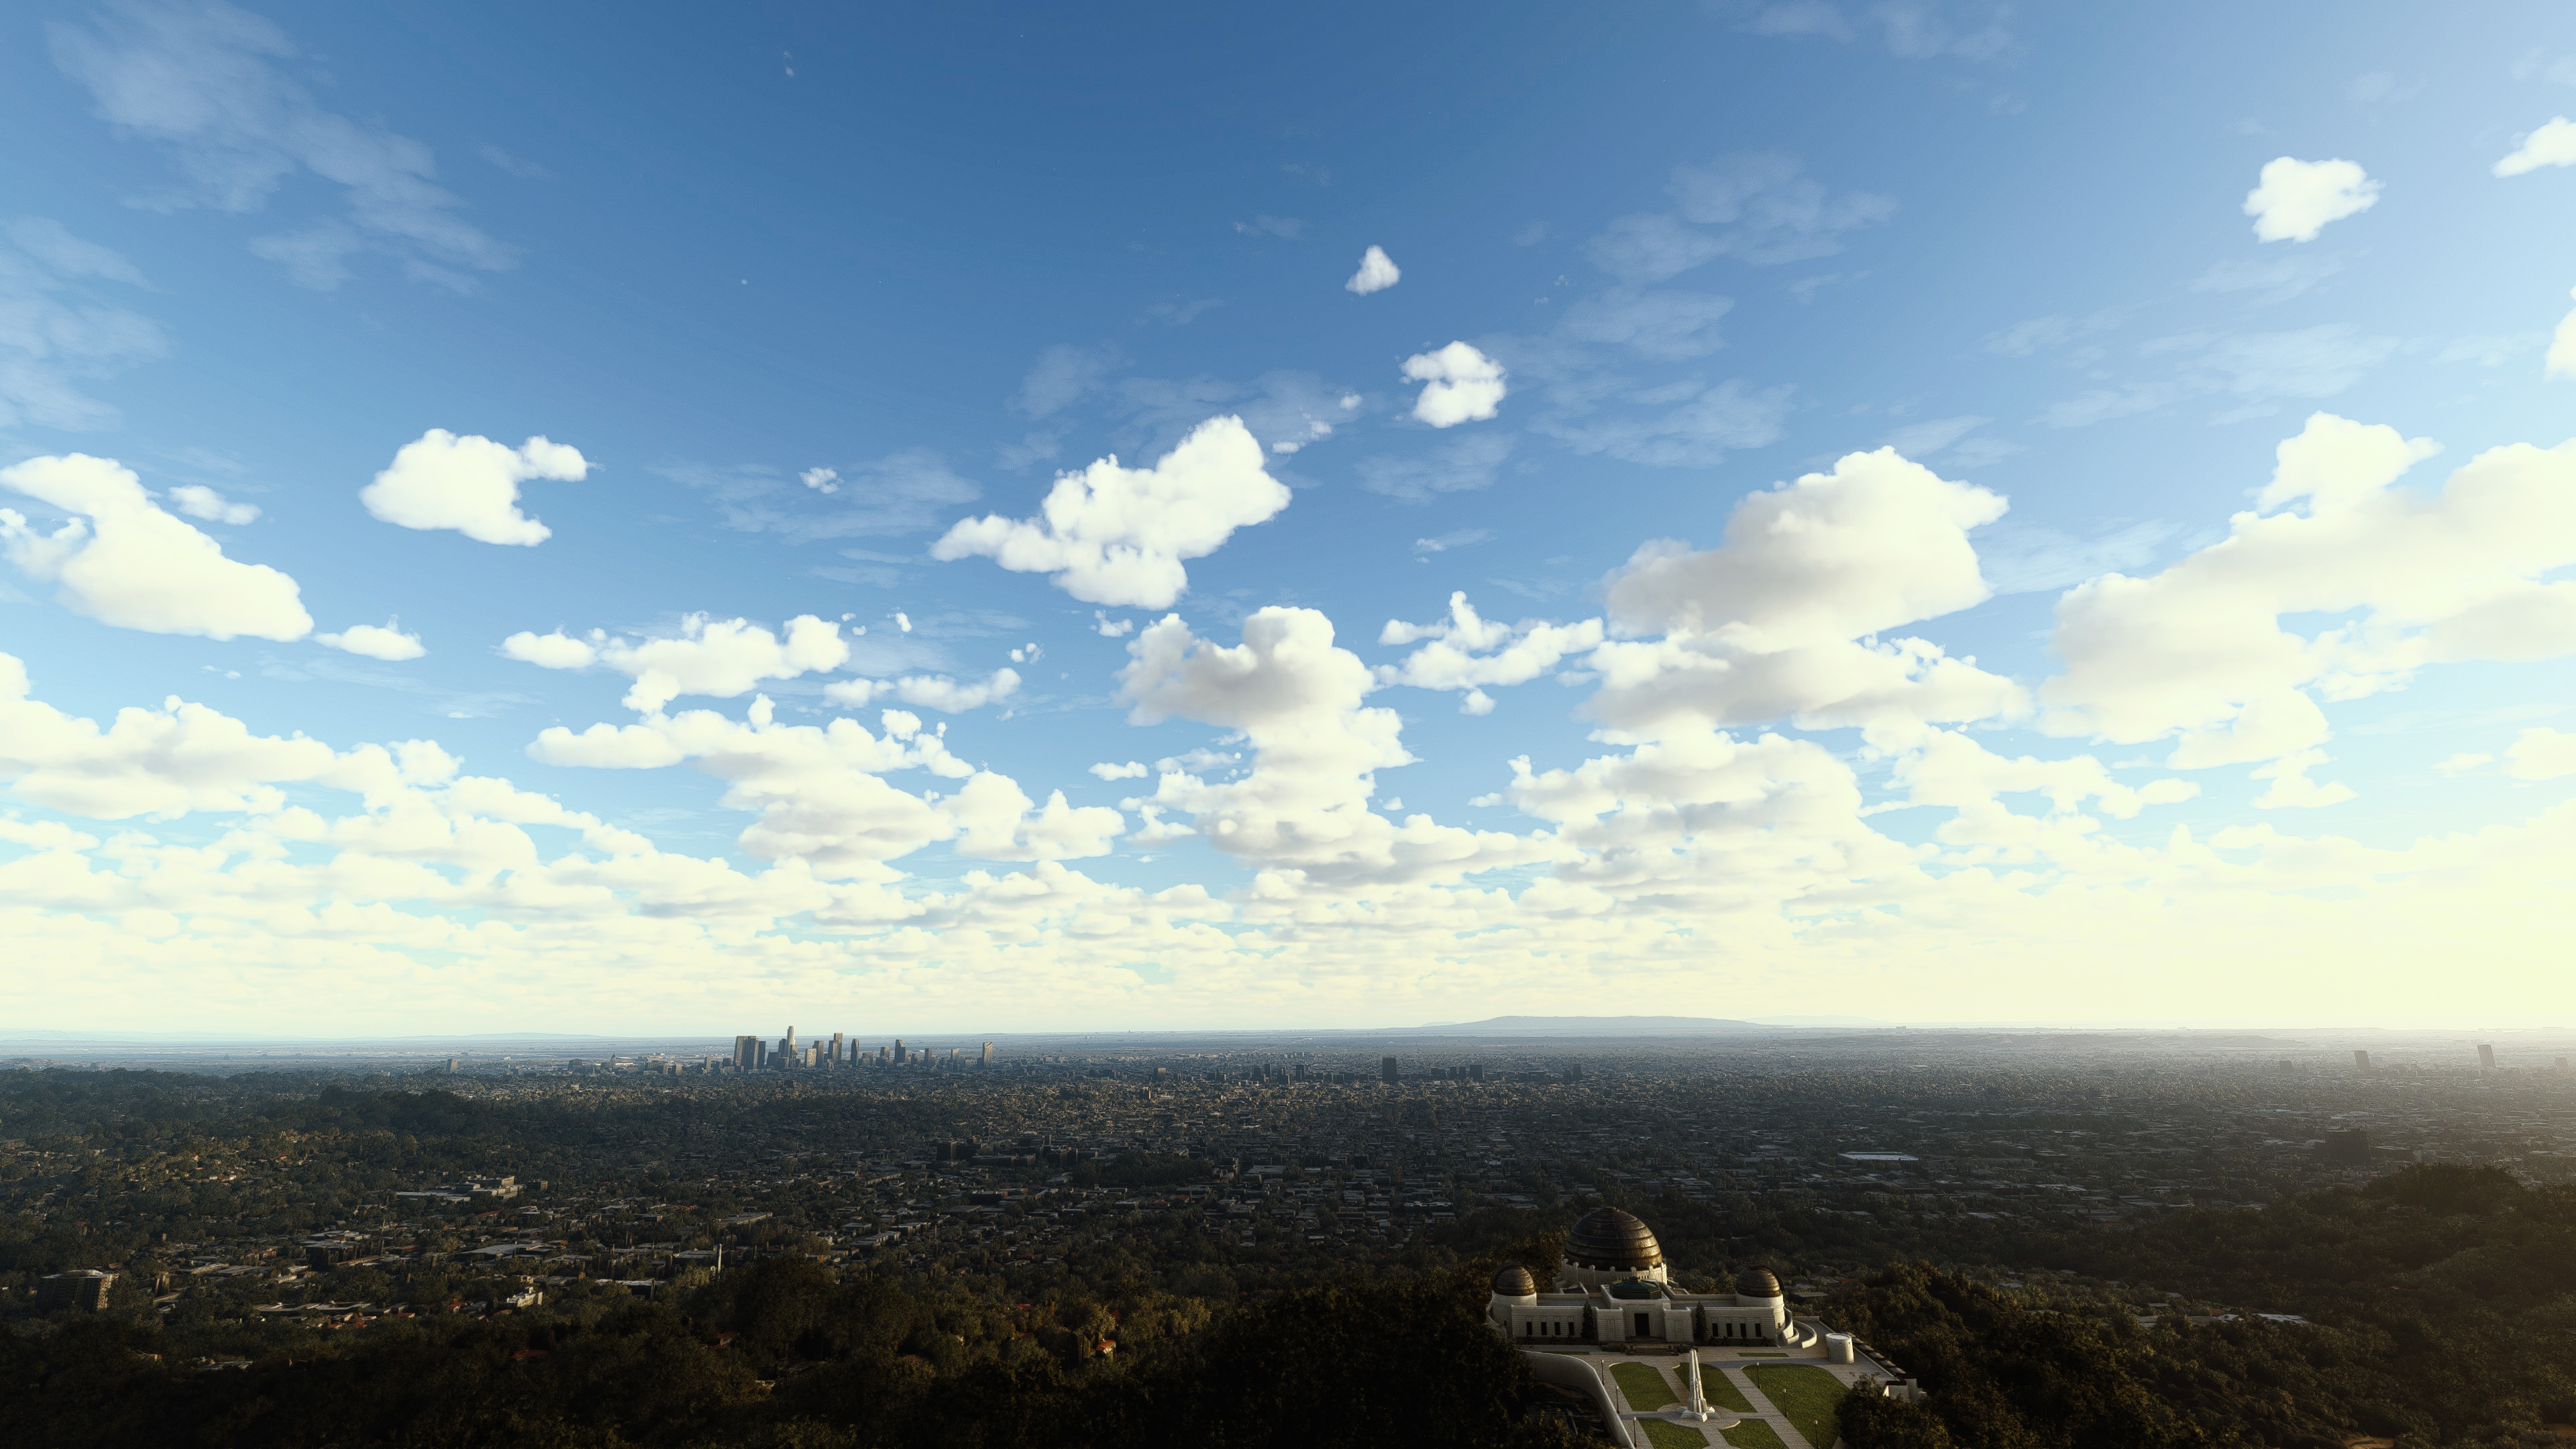 Griffith Observatory Flight Simulator City Sunset Los Angeles Sky Clouds Cityscape Video Games 3840x2160